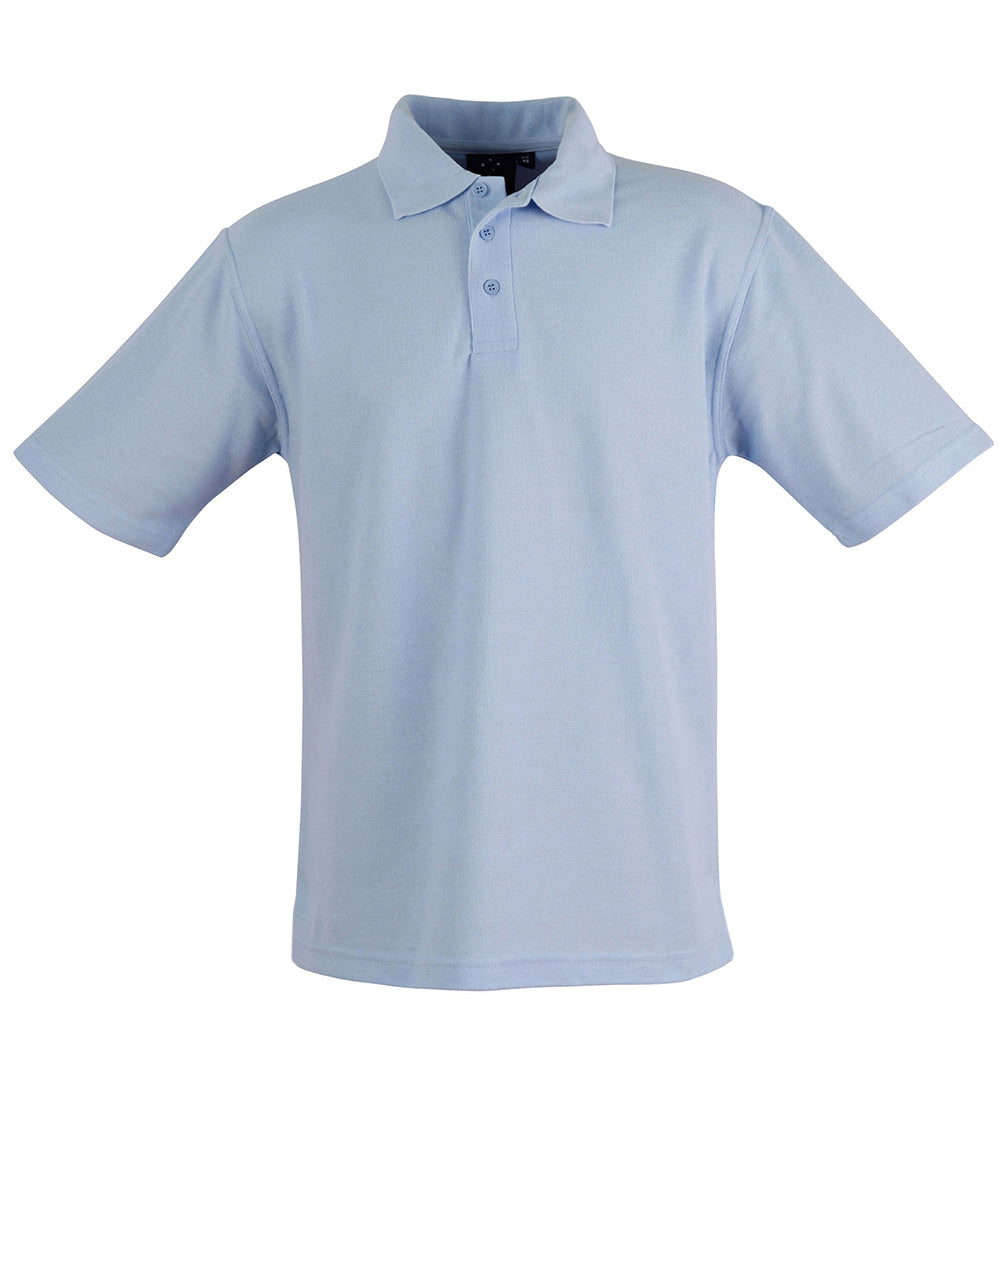 Kids Pique Knit Polo - made by AIW